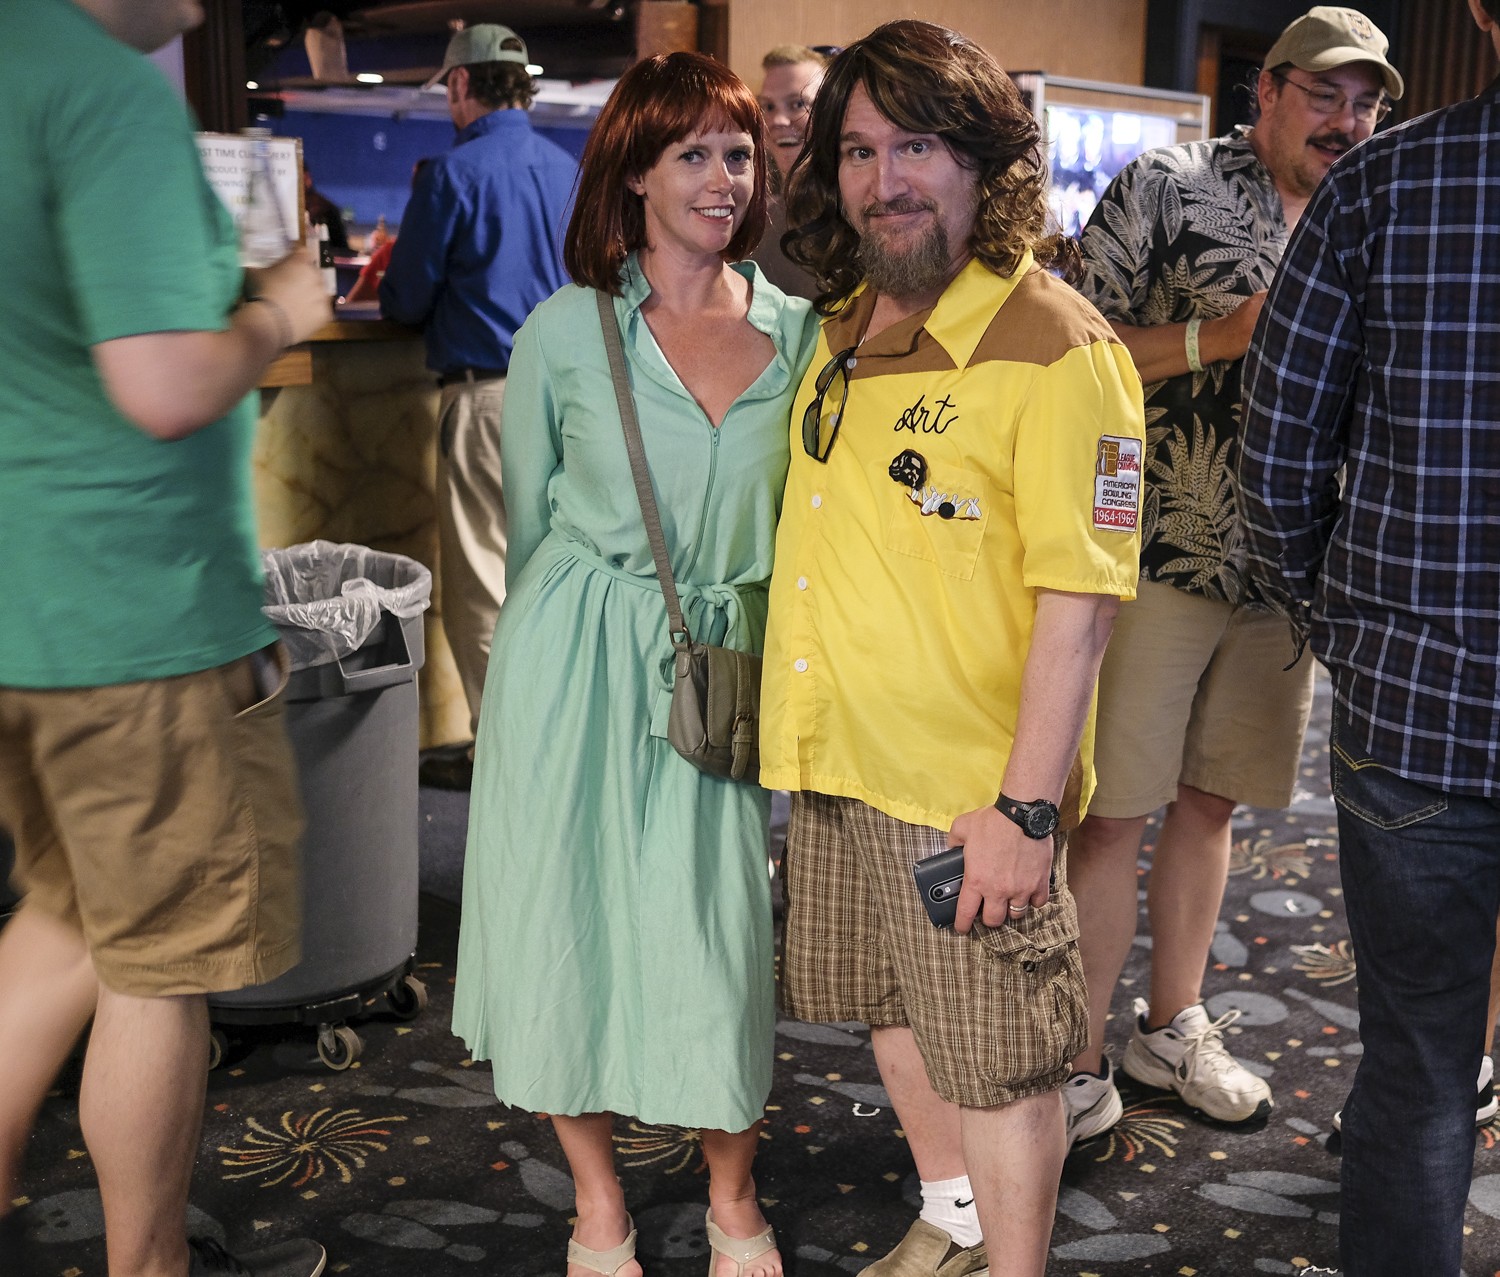 Melissa R. Marshall (left) and Perry Rintye (right) pose for a photo at Lebowski Fest.